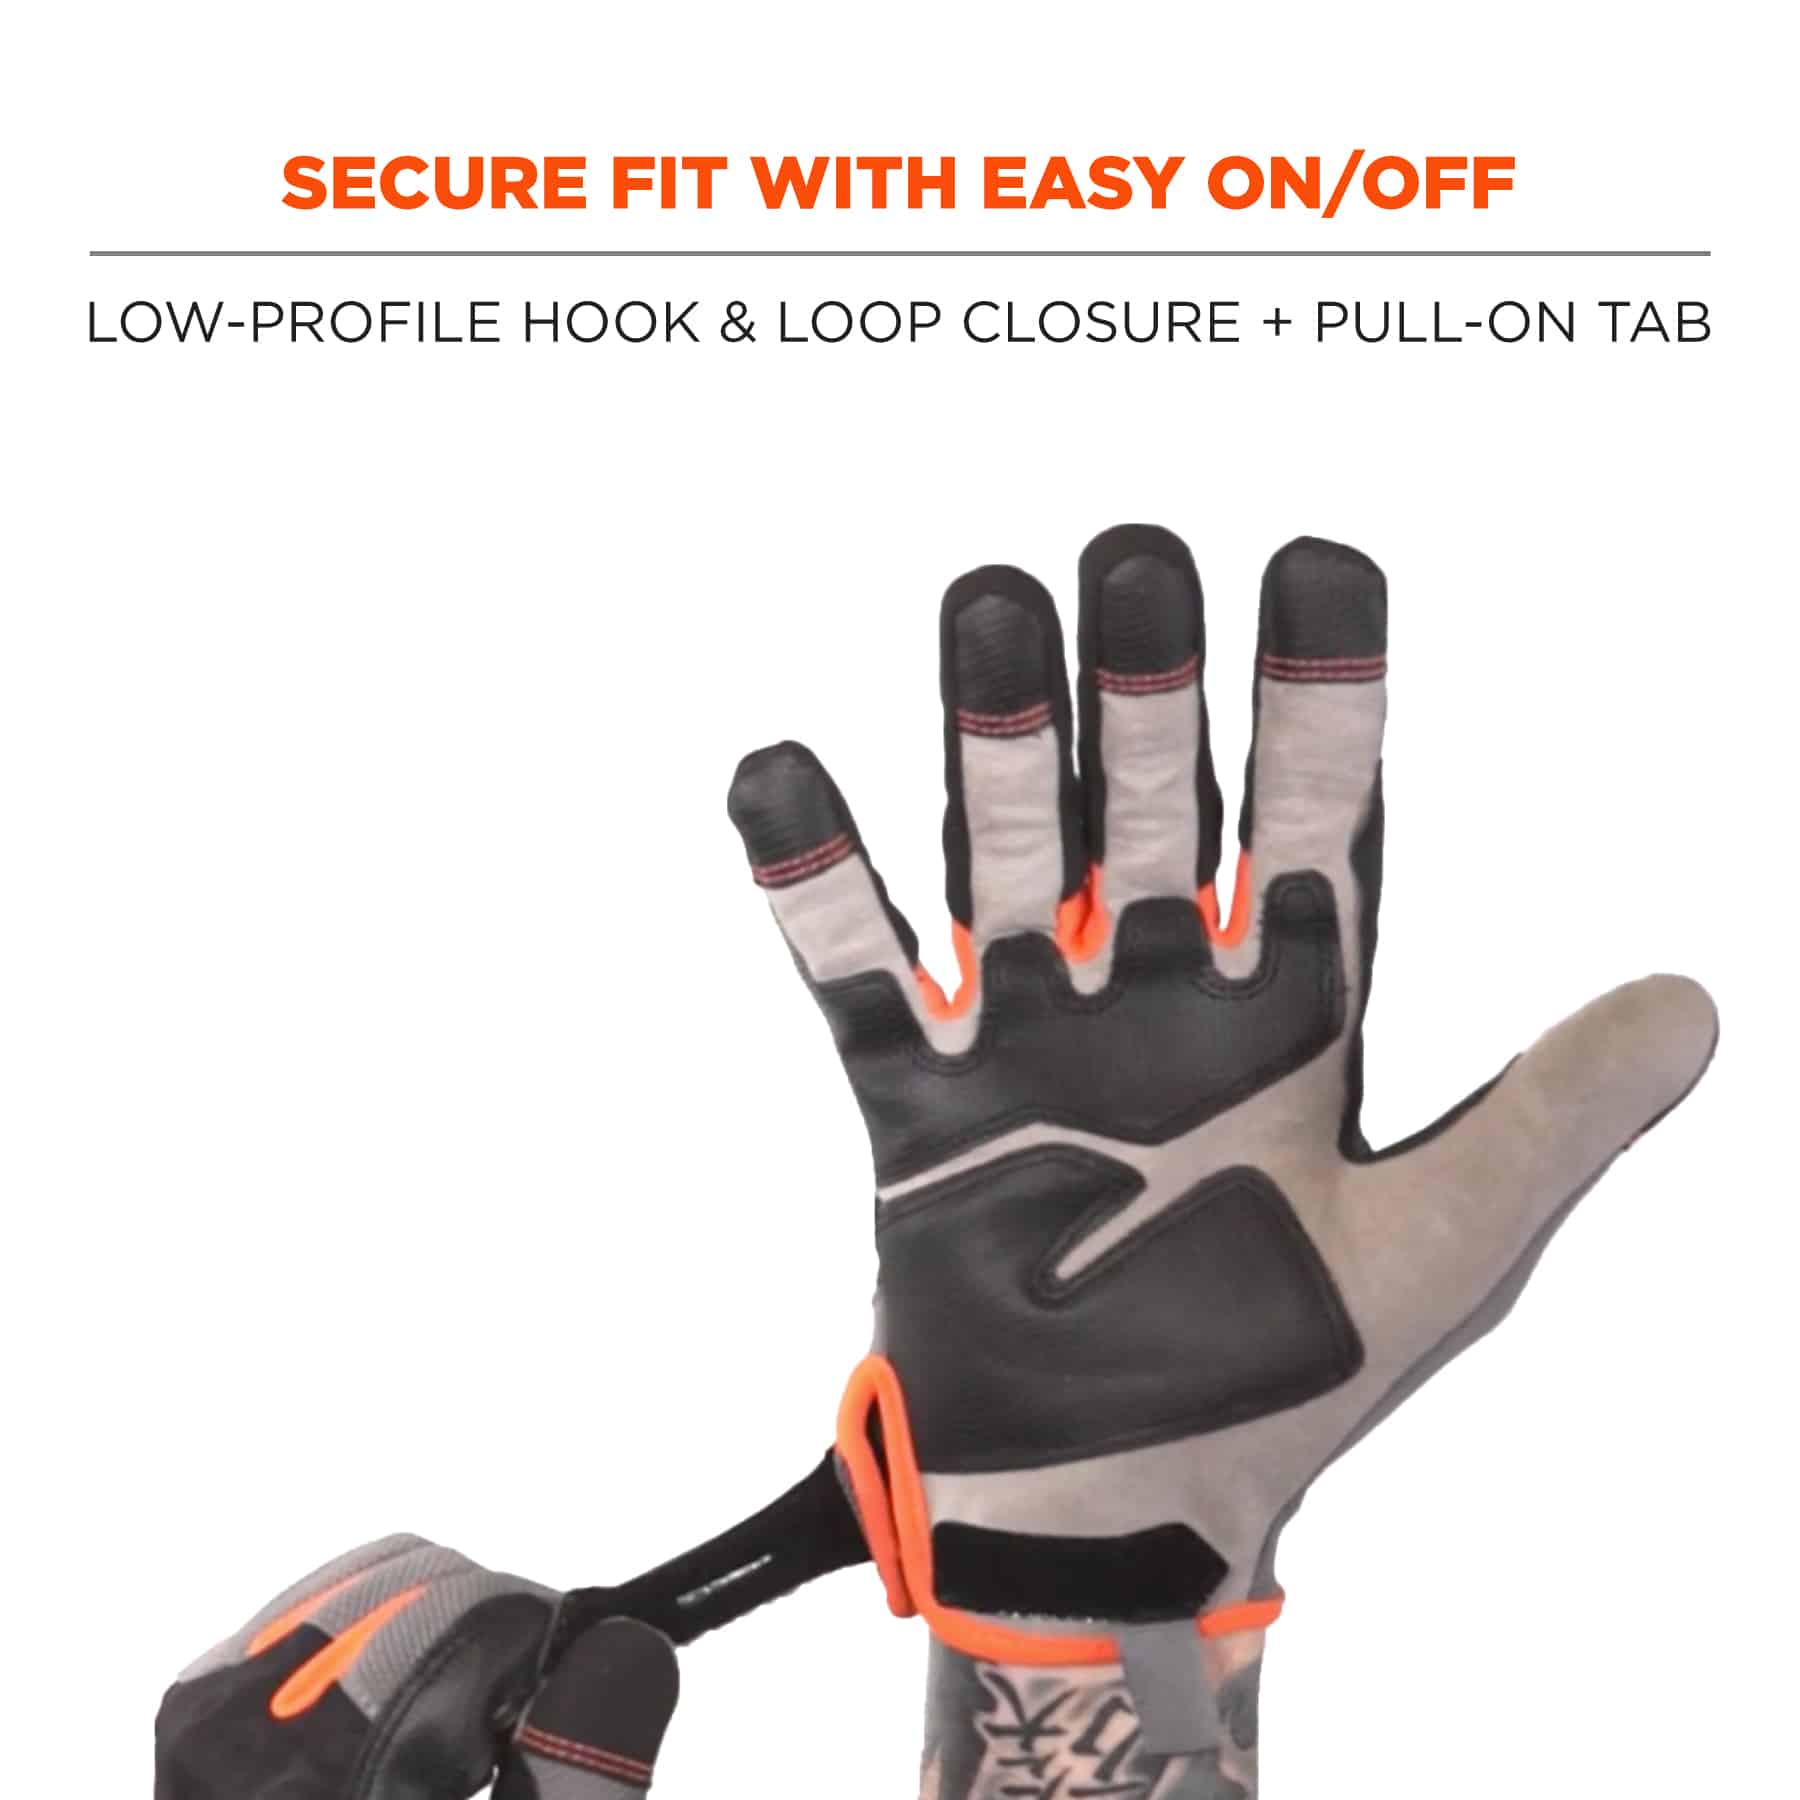 https://www.ergodyne.com/sites/default/files/product-images/17042-710-heavy-duty-utility-gloves-gray-secure-fit-with-easy-on-off.jpg